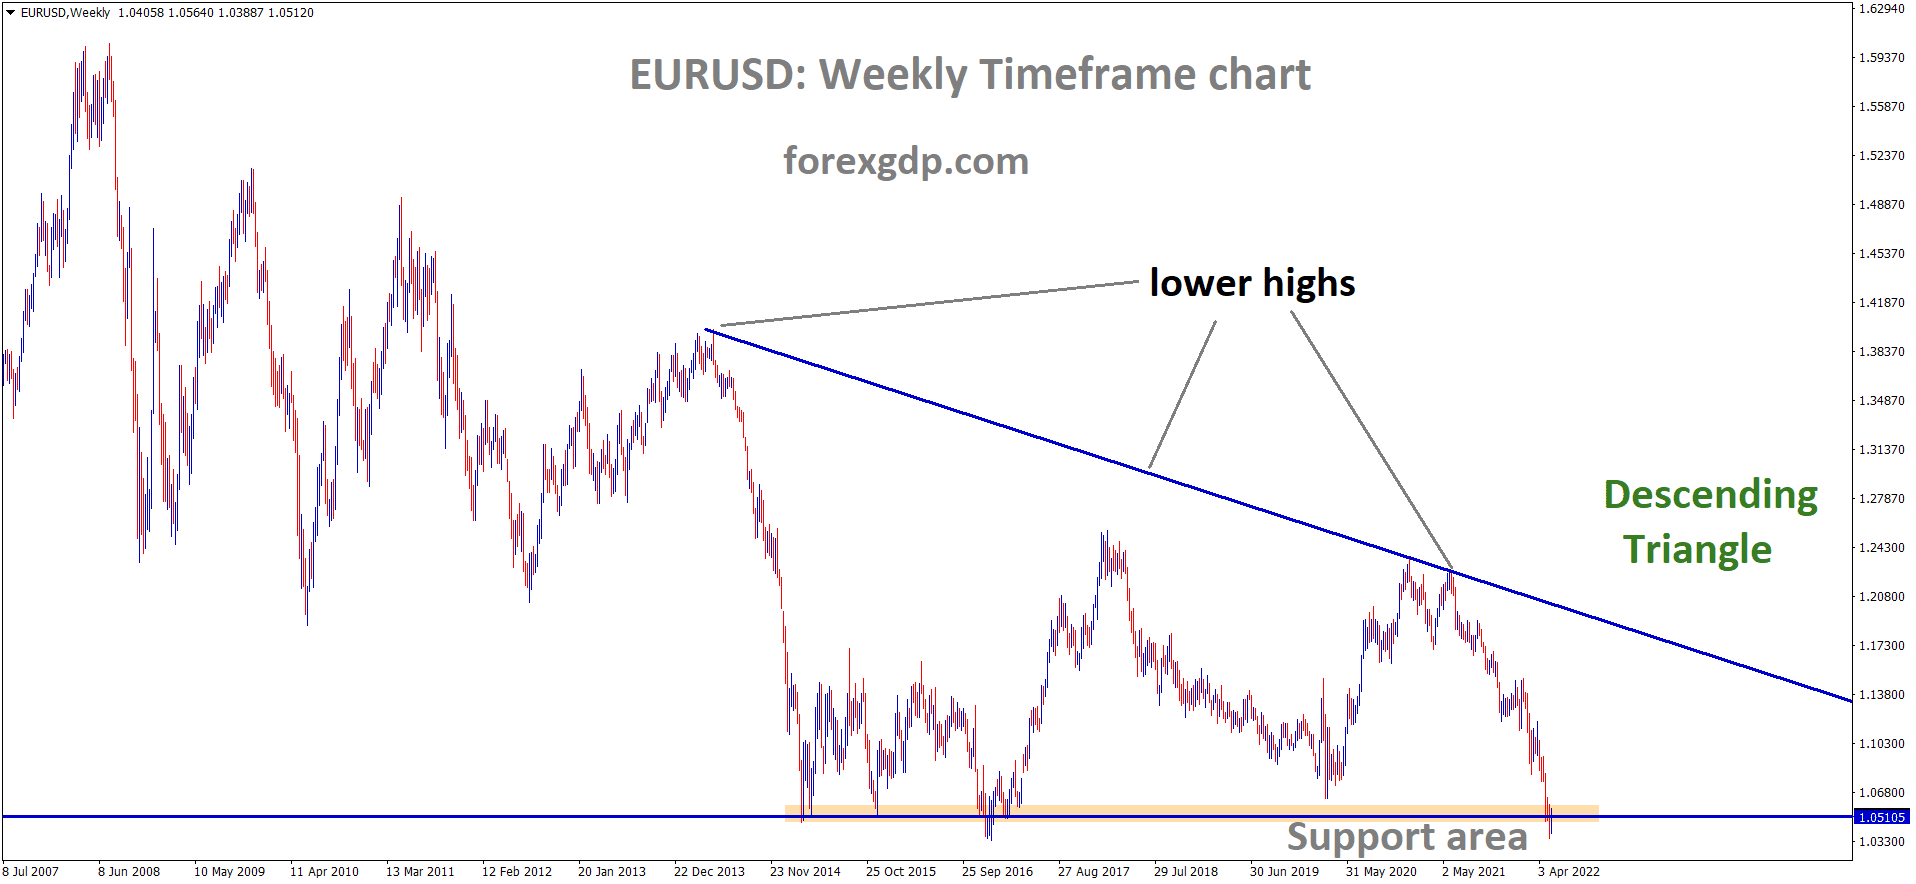 EURUSD is moving in the descending triangle pattern and market has reached the support area of the pattern.